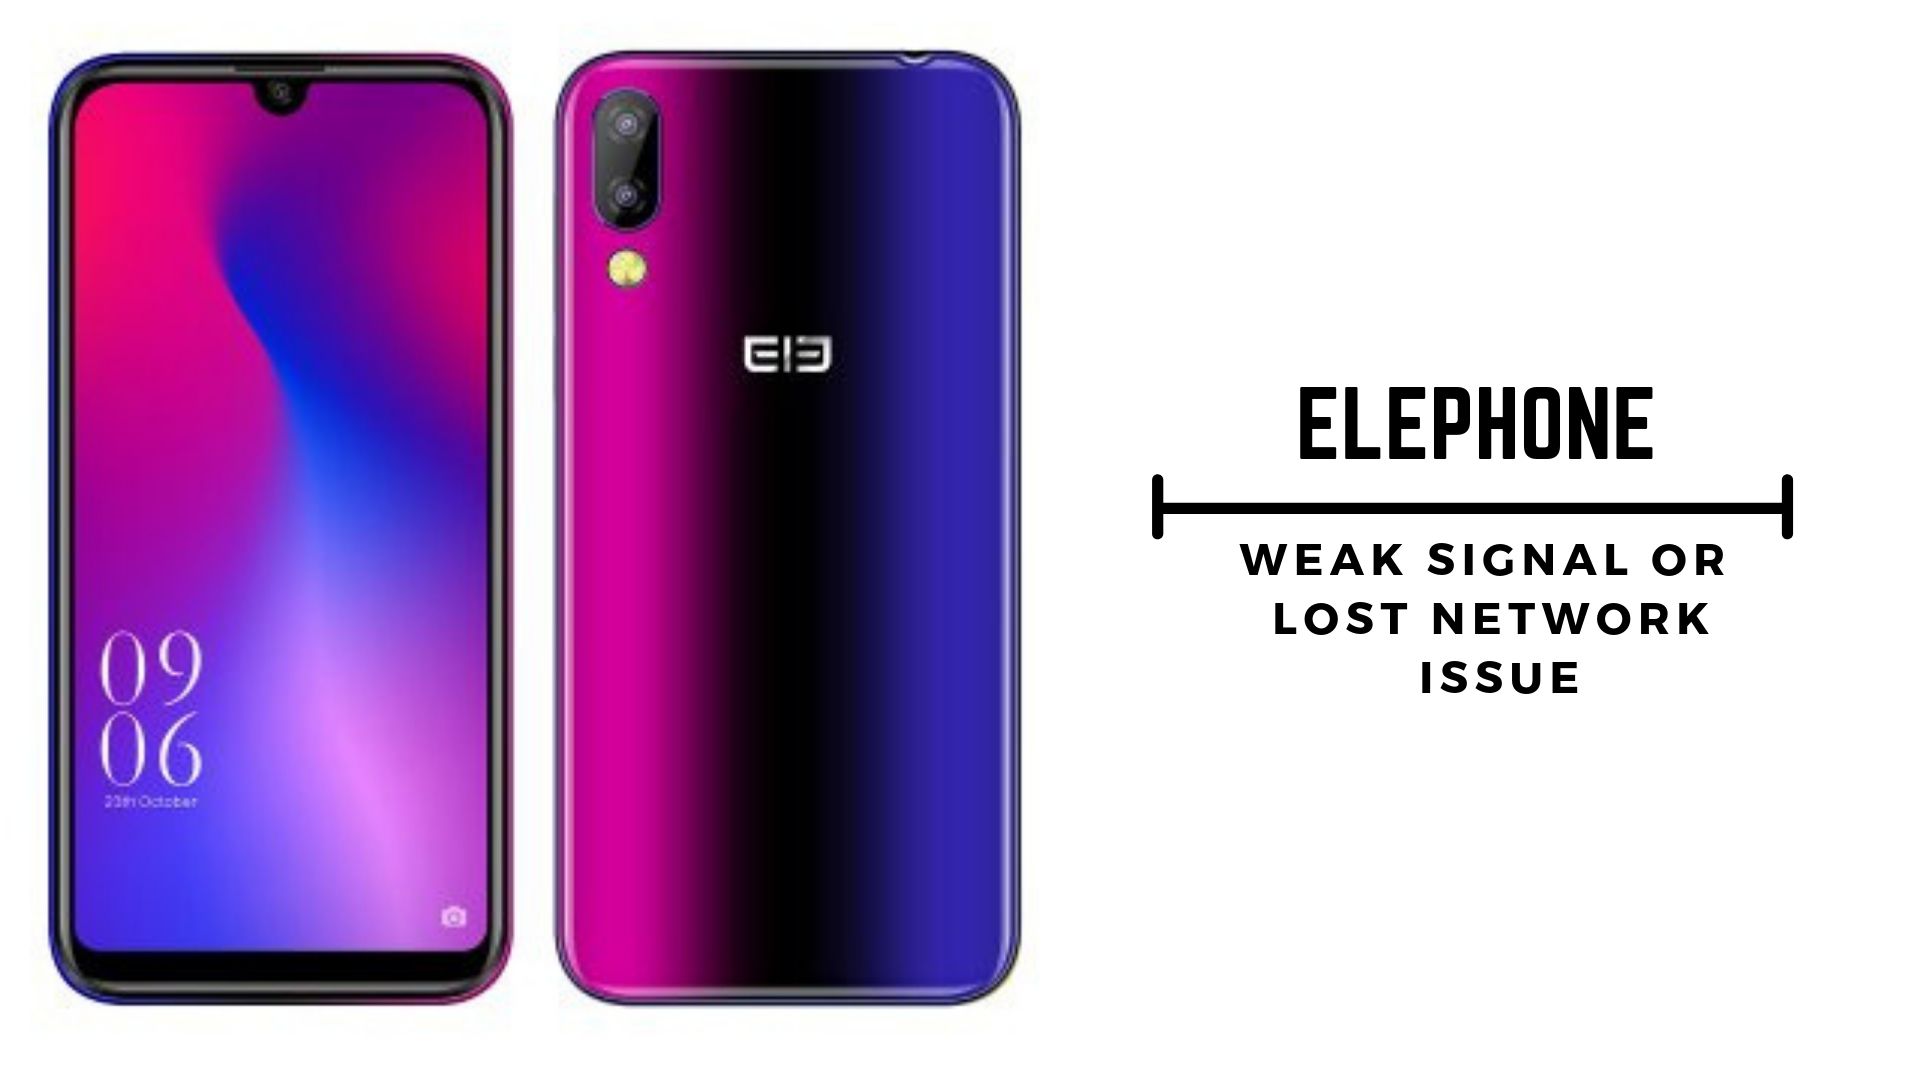 Guide to Fix Elephone Weak Signal or Lost Network Issue